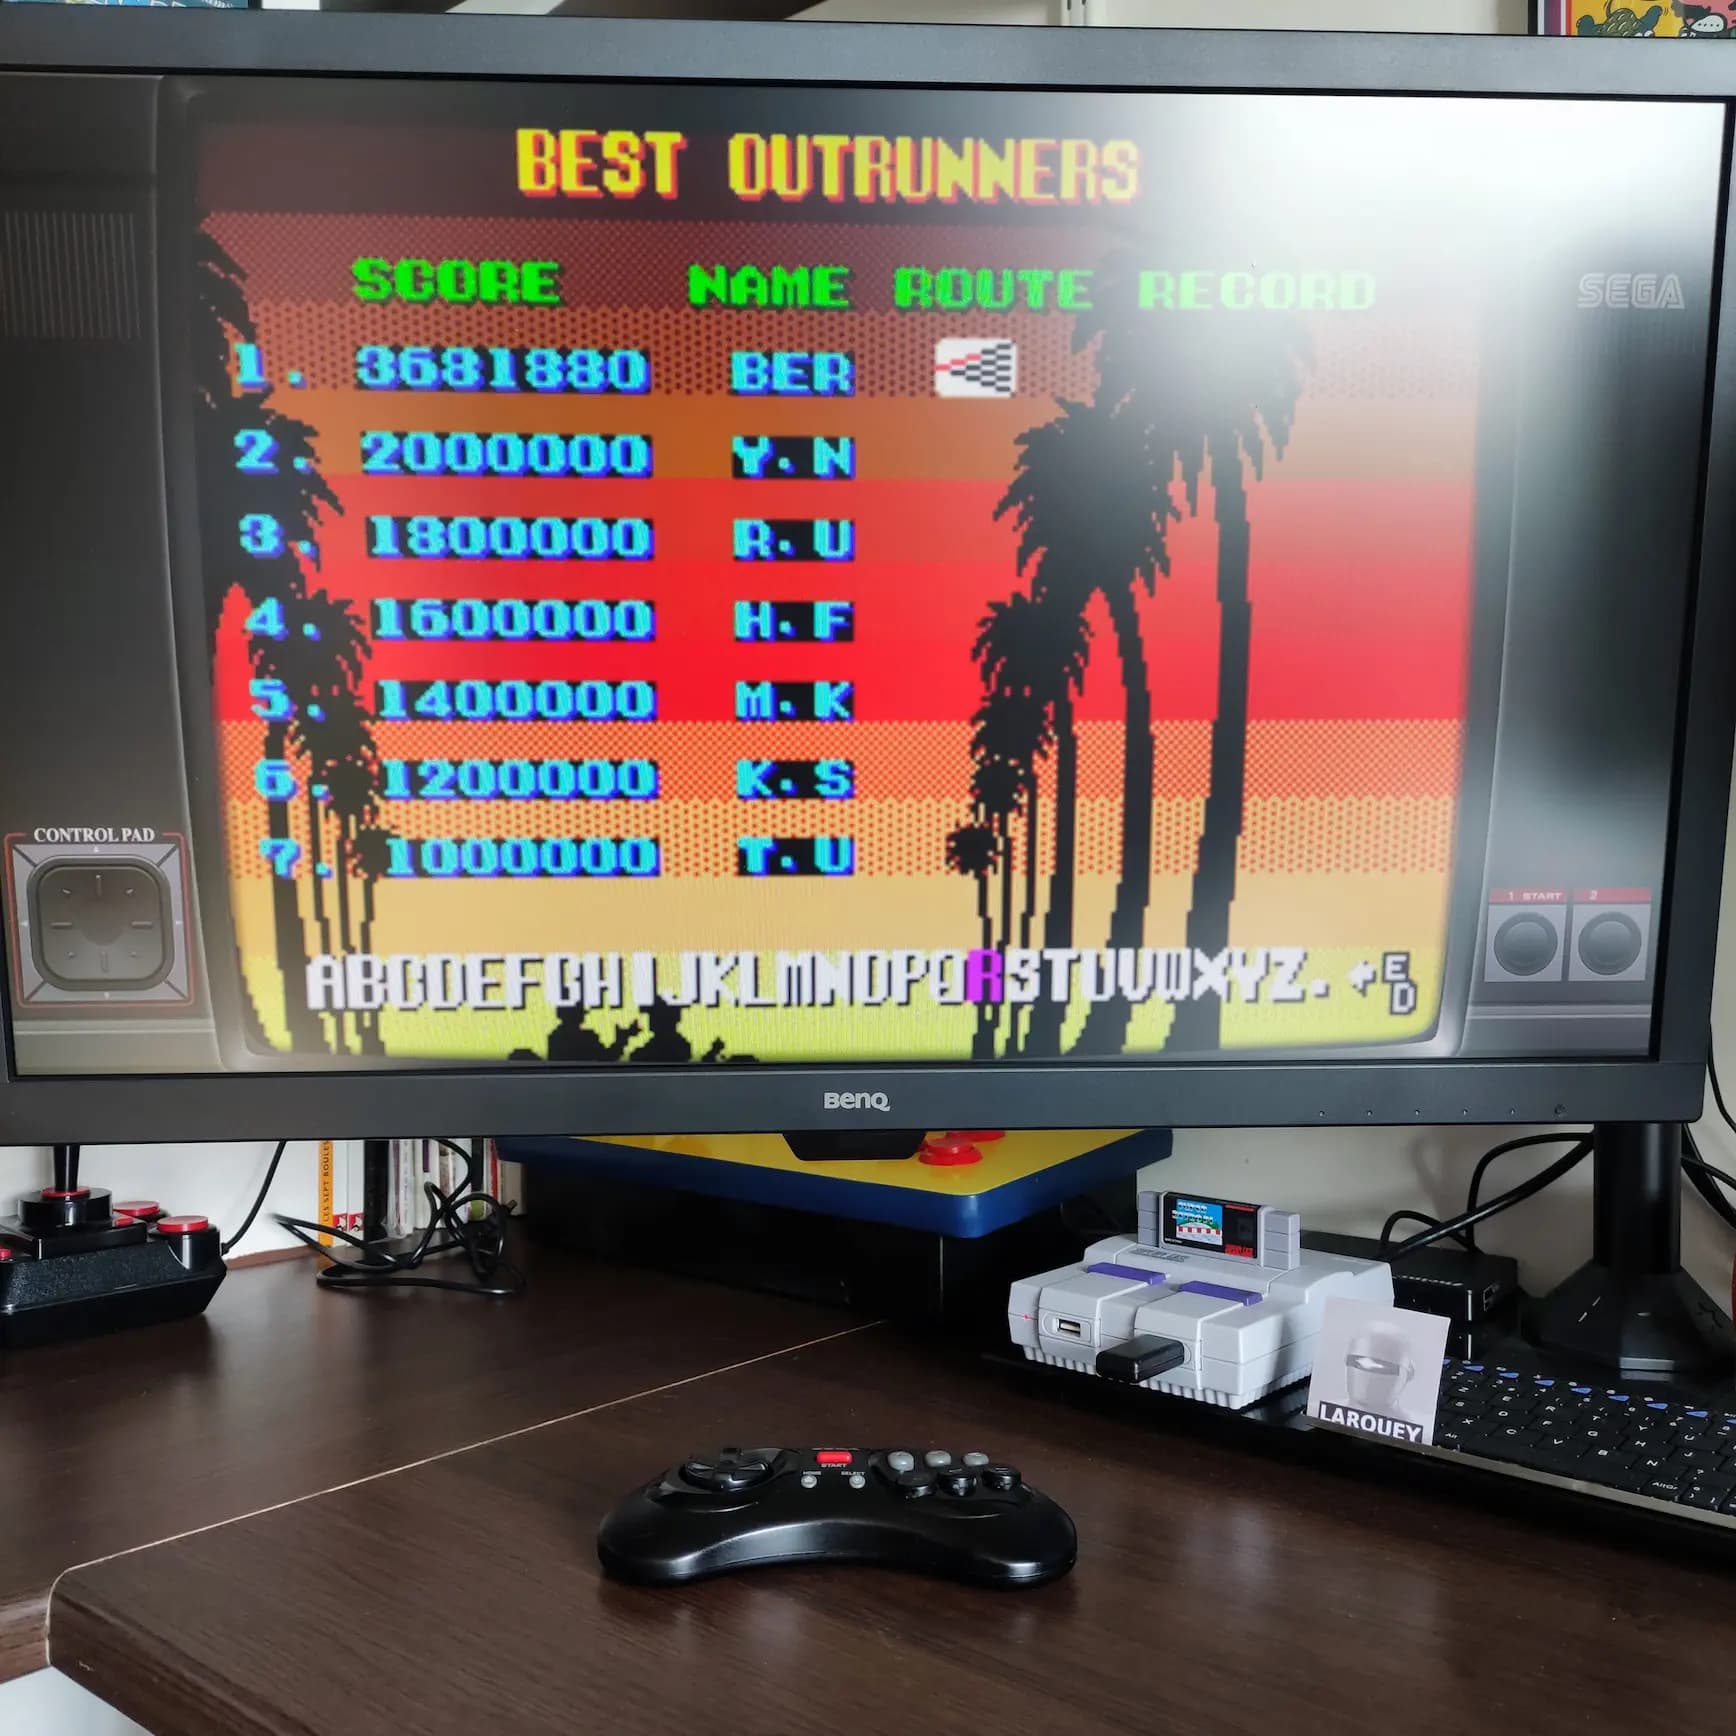 Larquey: Outrun 3D (Sega Master System Emulated) 3,681,880 points on 2022-07-30 01:30:53